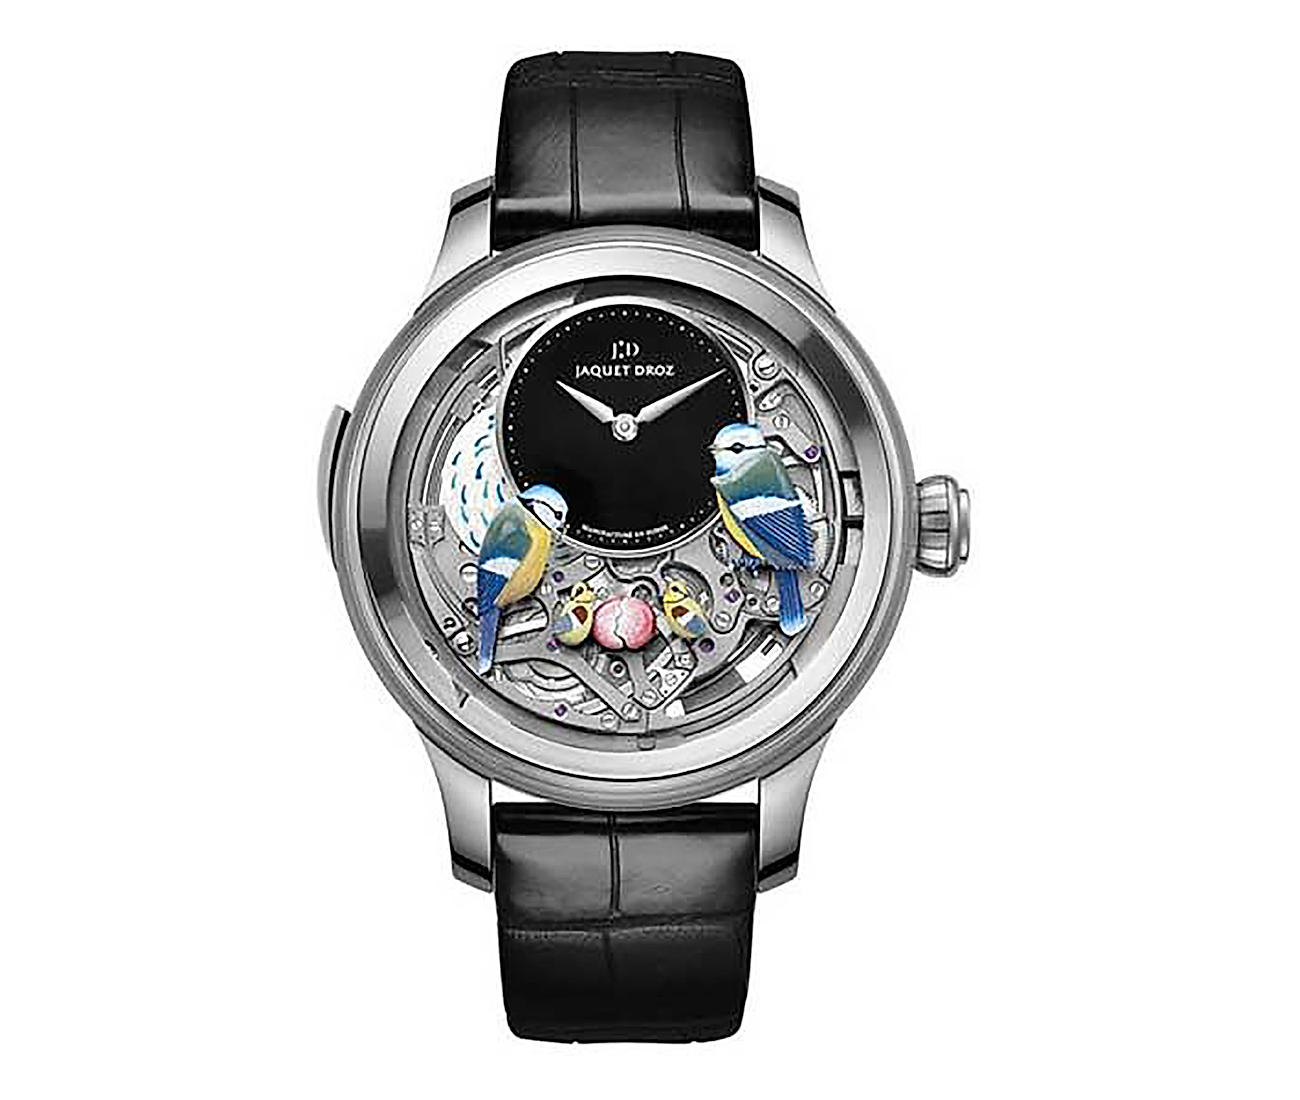 Grande Seconde Minute Repeater And The Bird Repeater